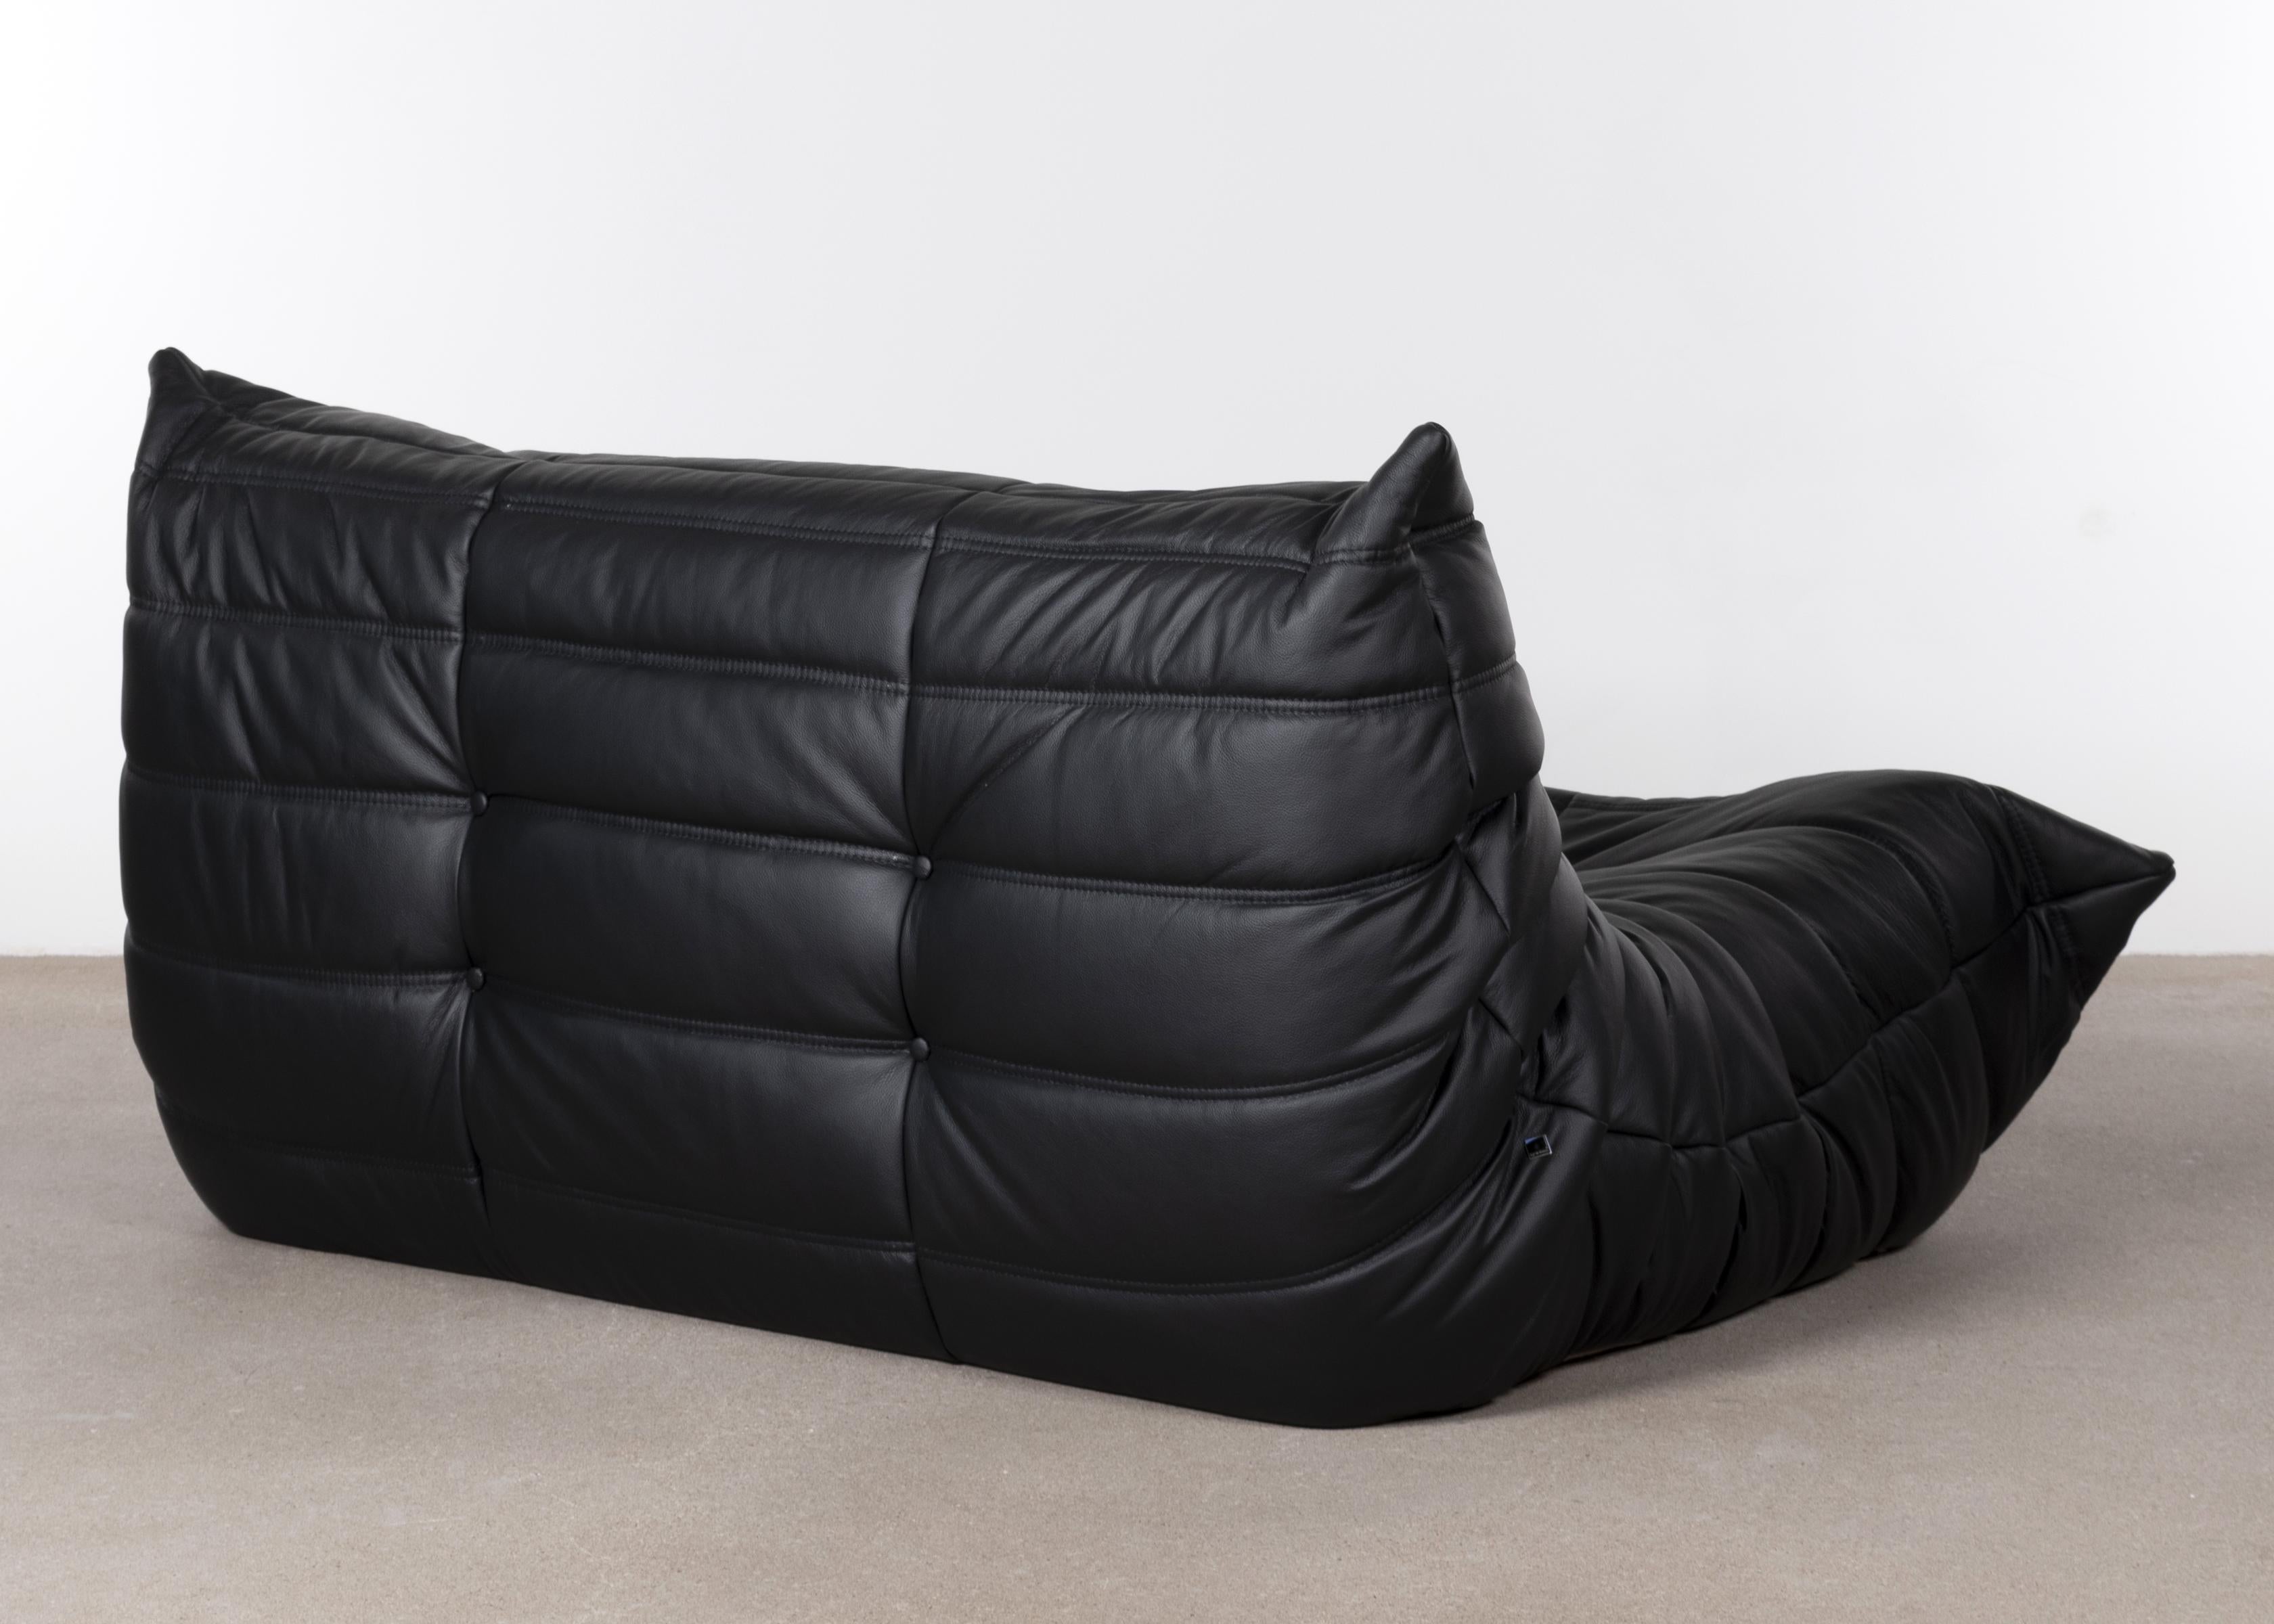 Late 20th Century Michel Ducaroy Togo Two-Seat Sofa in Black Leather for Ligne Roset, 1973